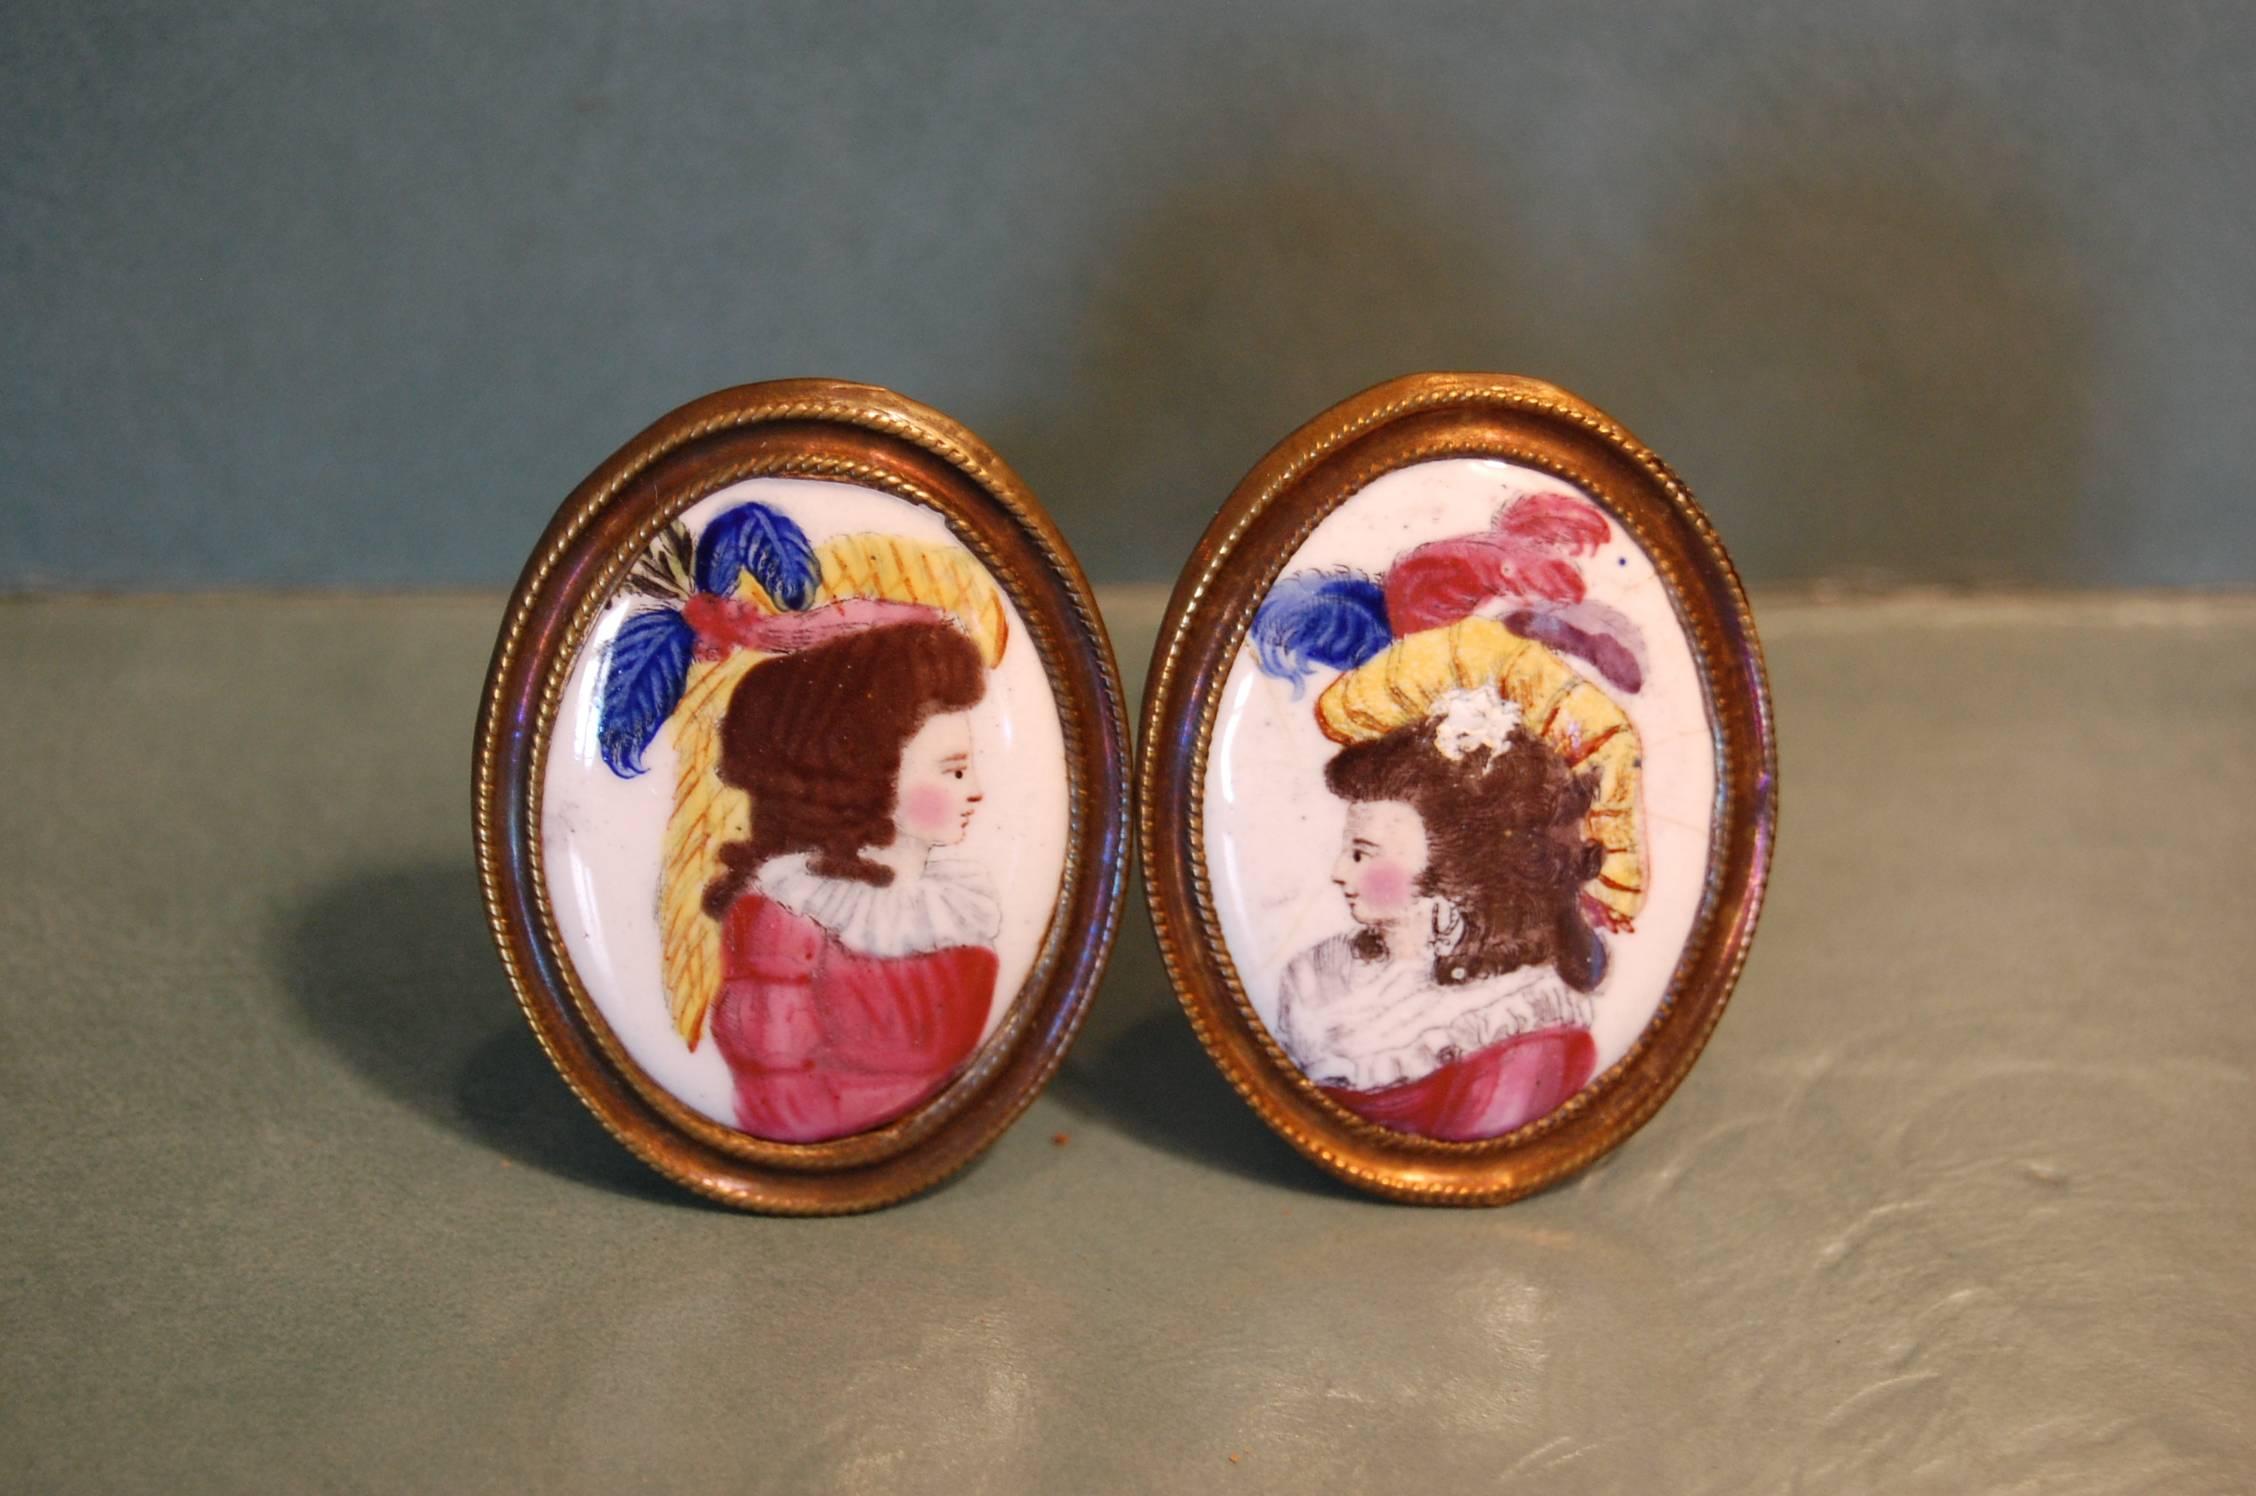 Wonderful pair of oval tiebacks featuring 18th century ladies of fashion. These women were purported to be actresses of the day when we purchased these tiebacks back in the 1960s.